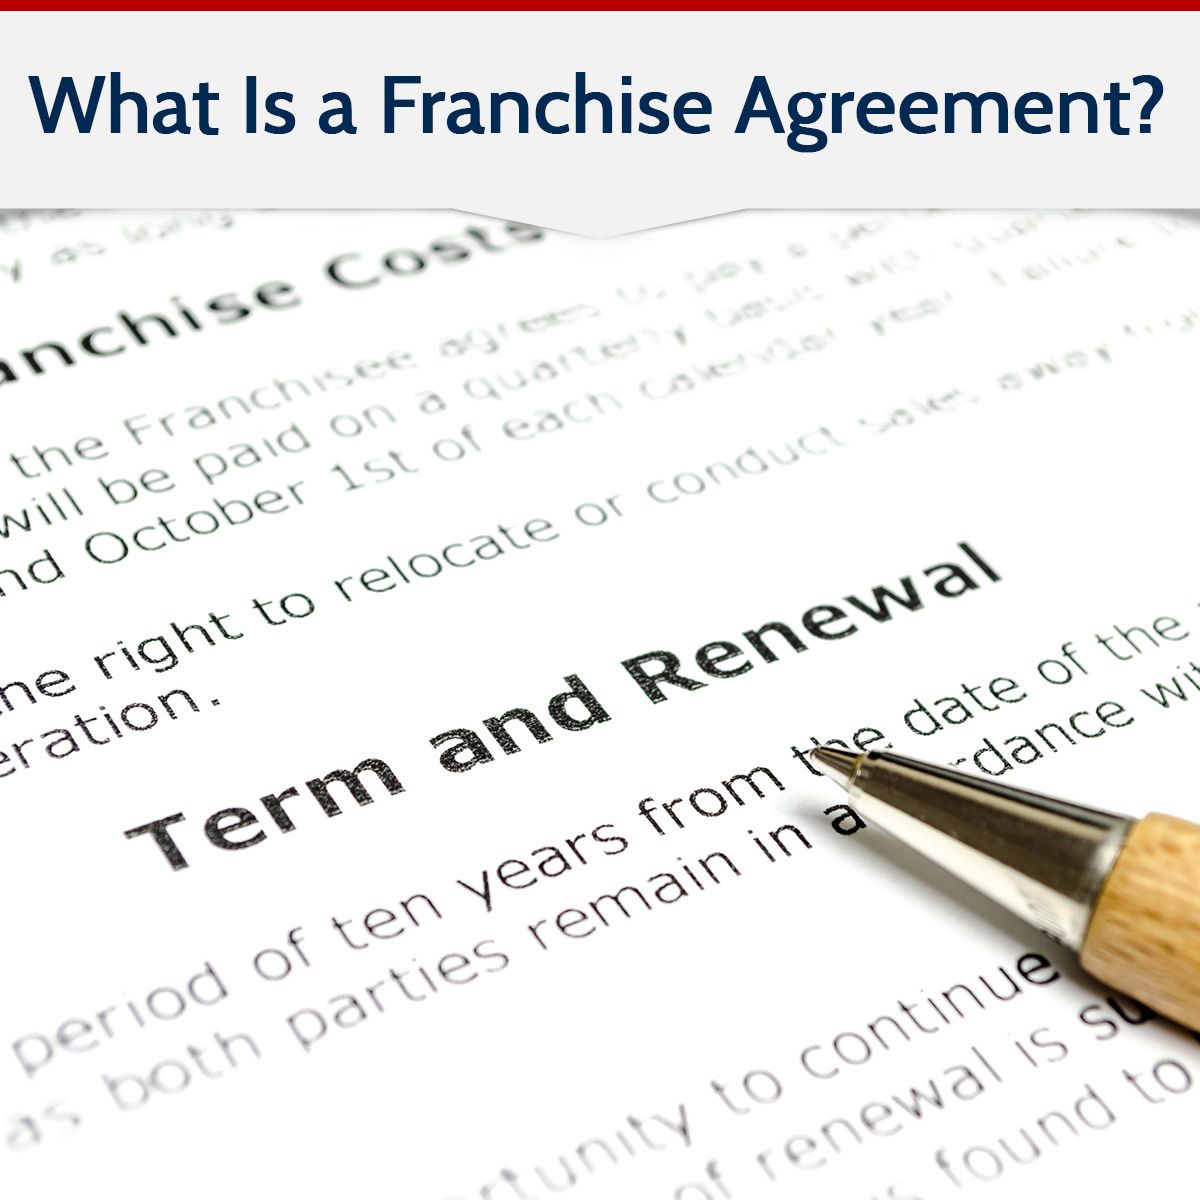 What Is a Franchise Agreement?